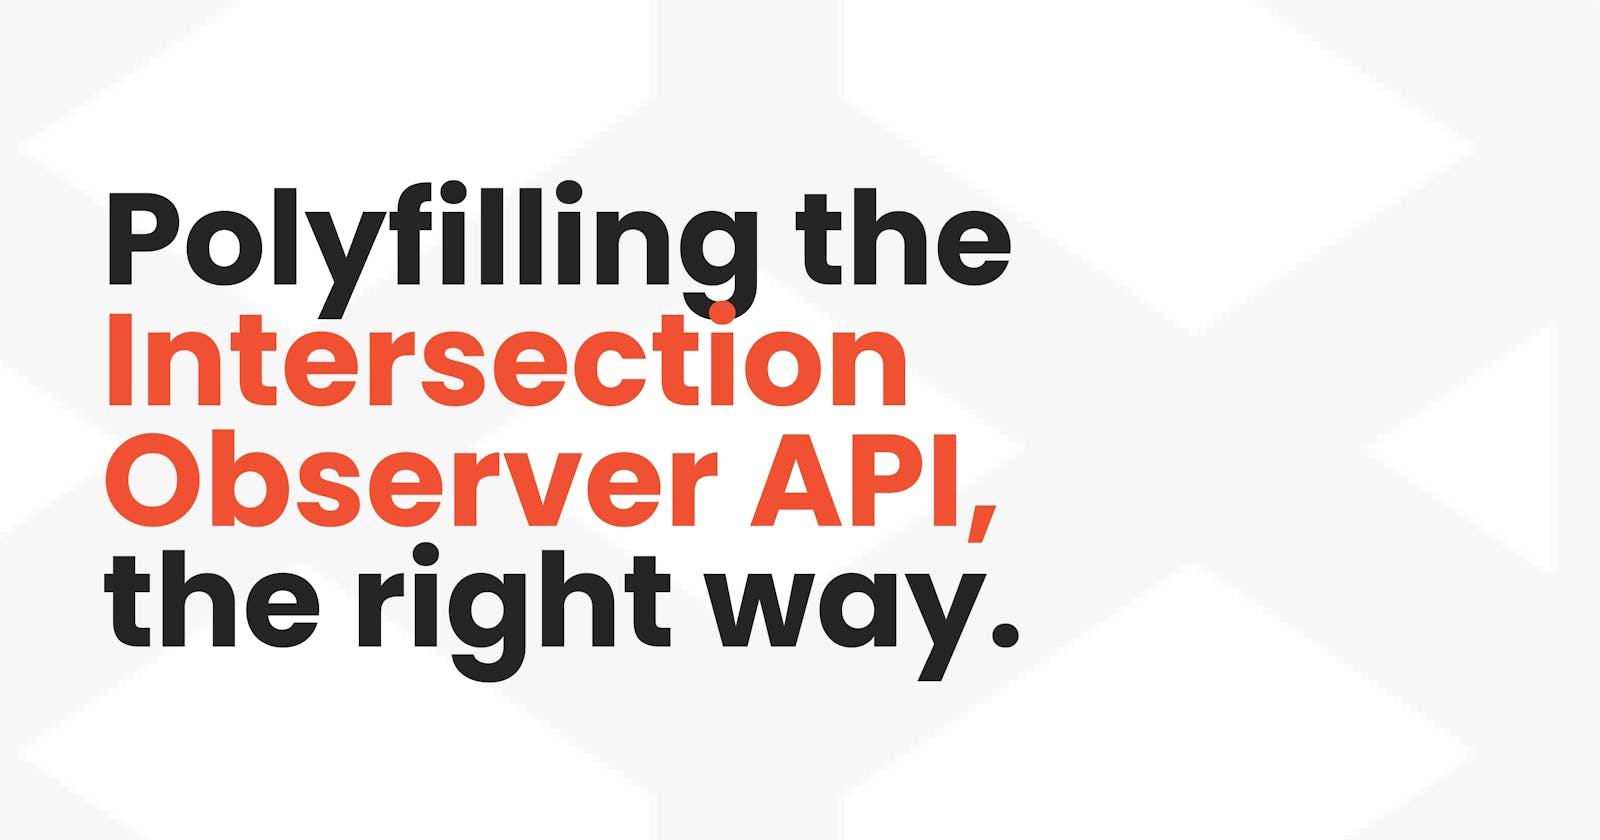 Polyfilling the Intersection Observer API the right way